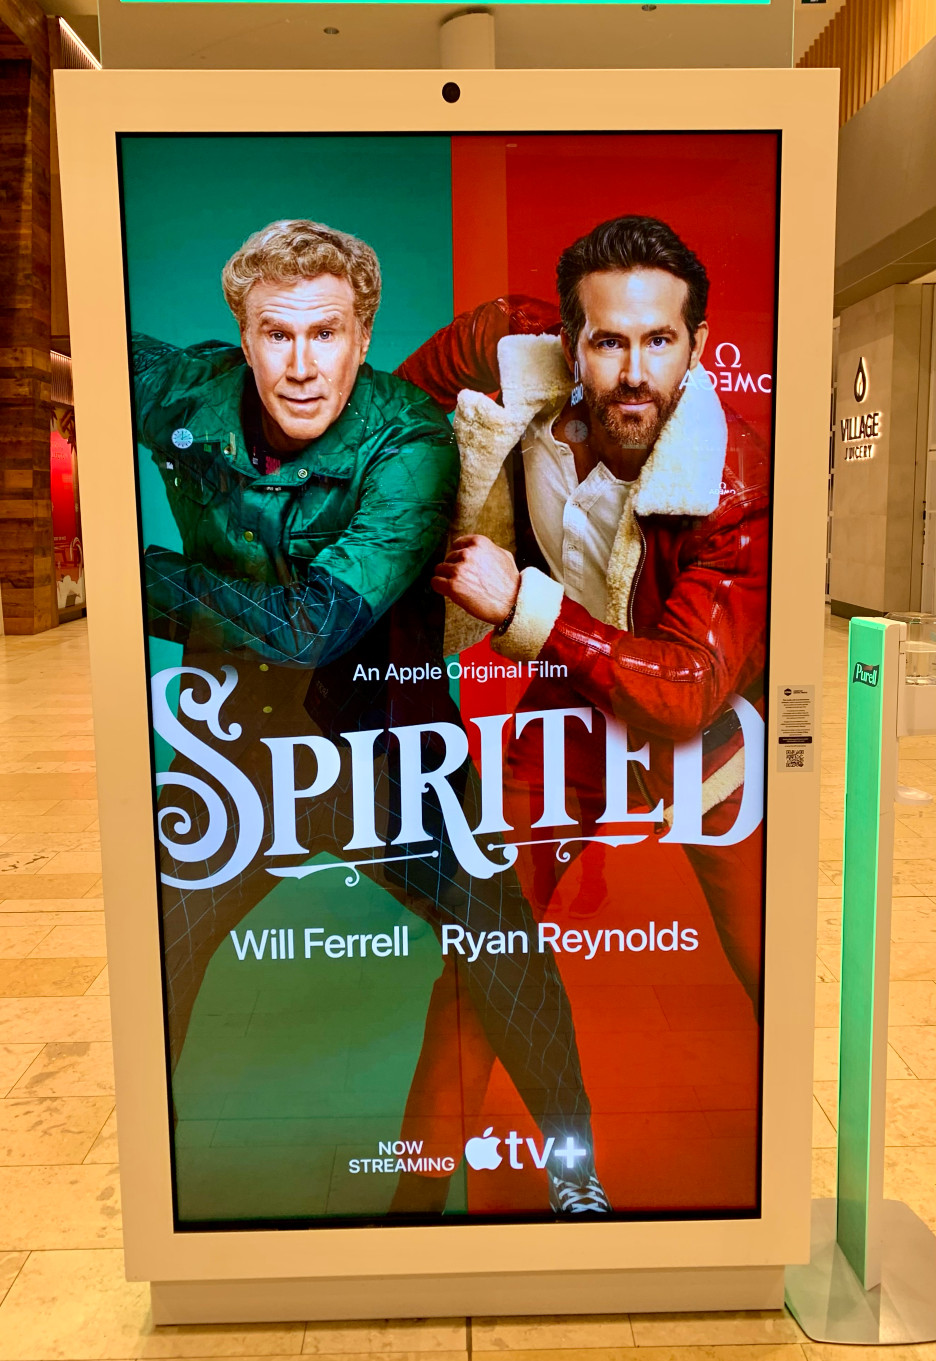 Worth a Watch? Ryan Reynolds and Will Ferrel hit centre stage in musical comedy ‘Spirited’